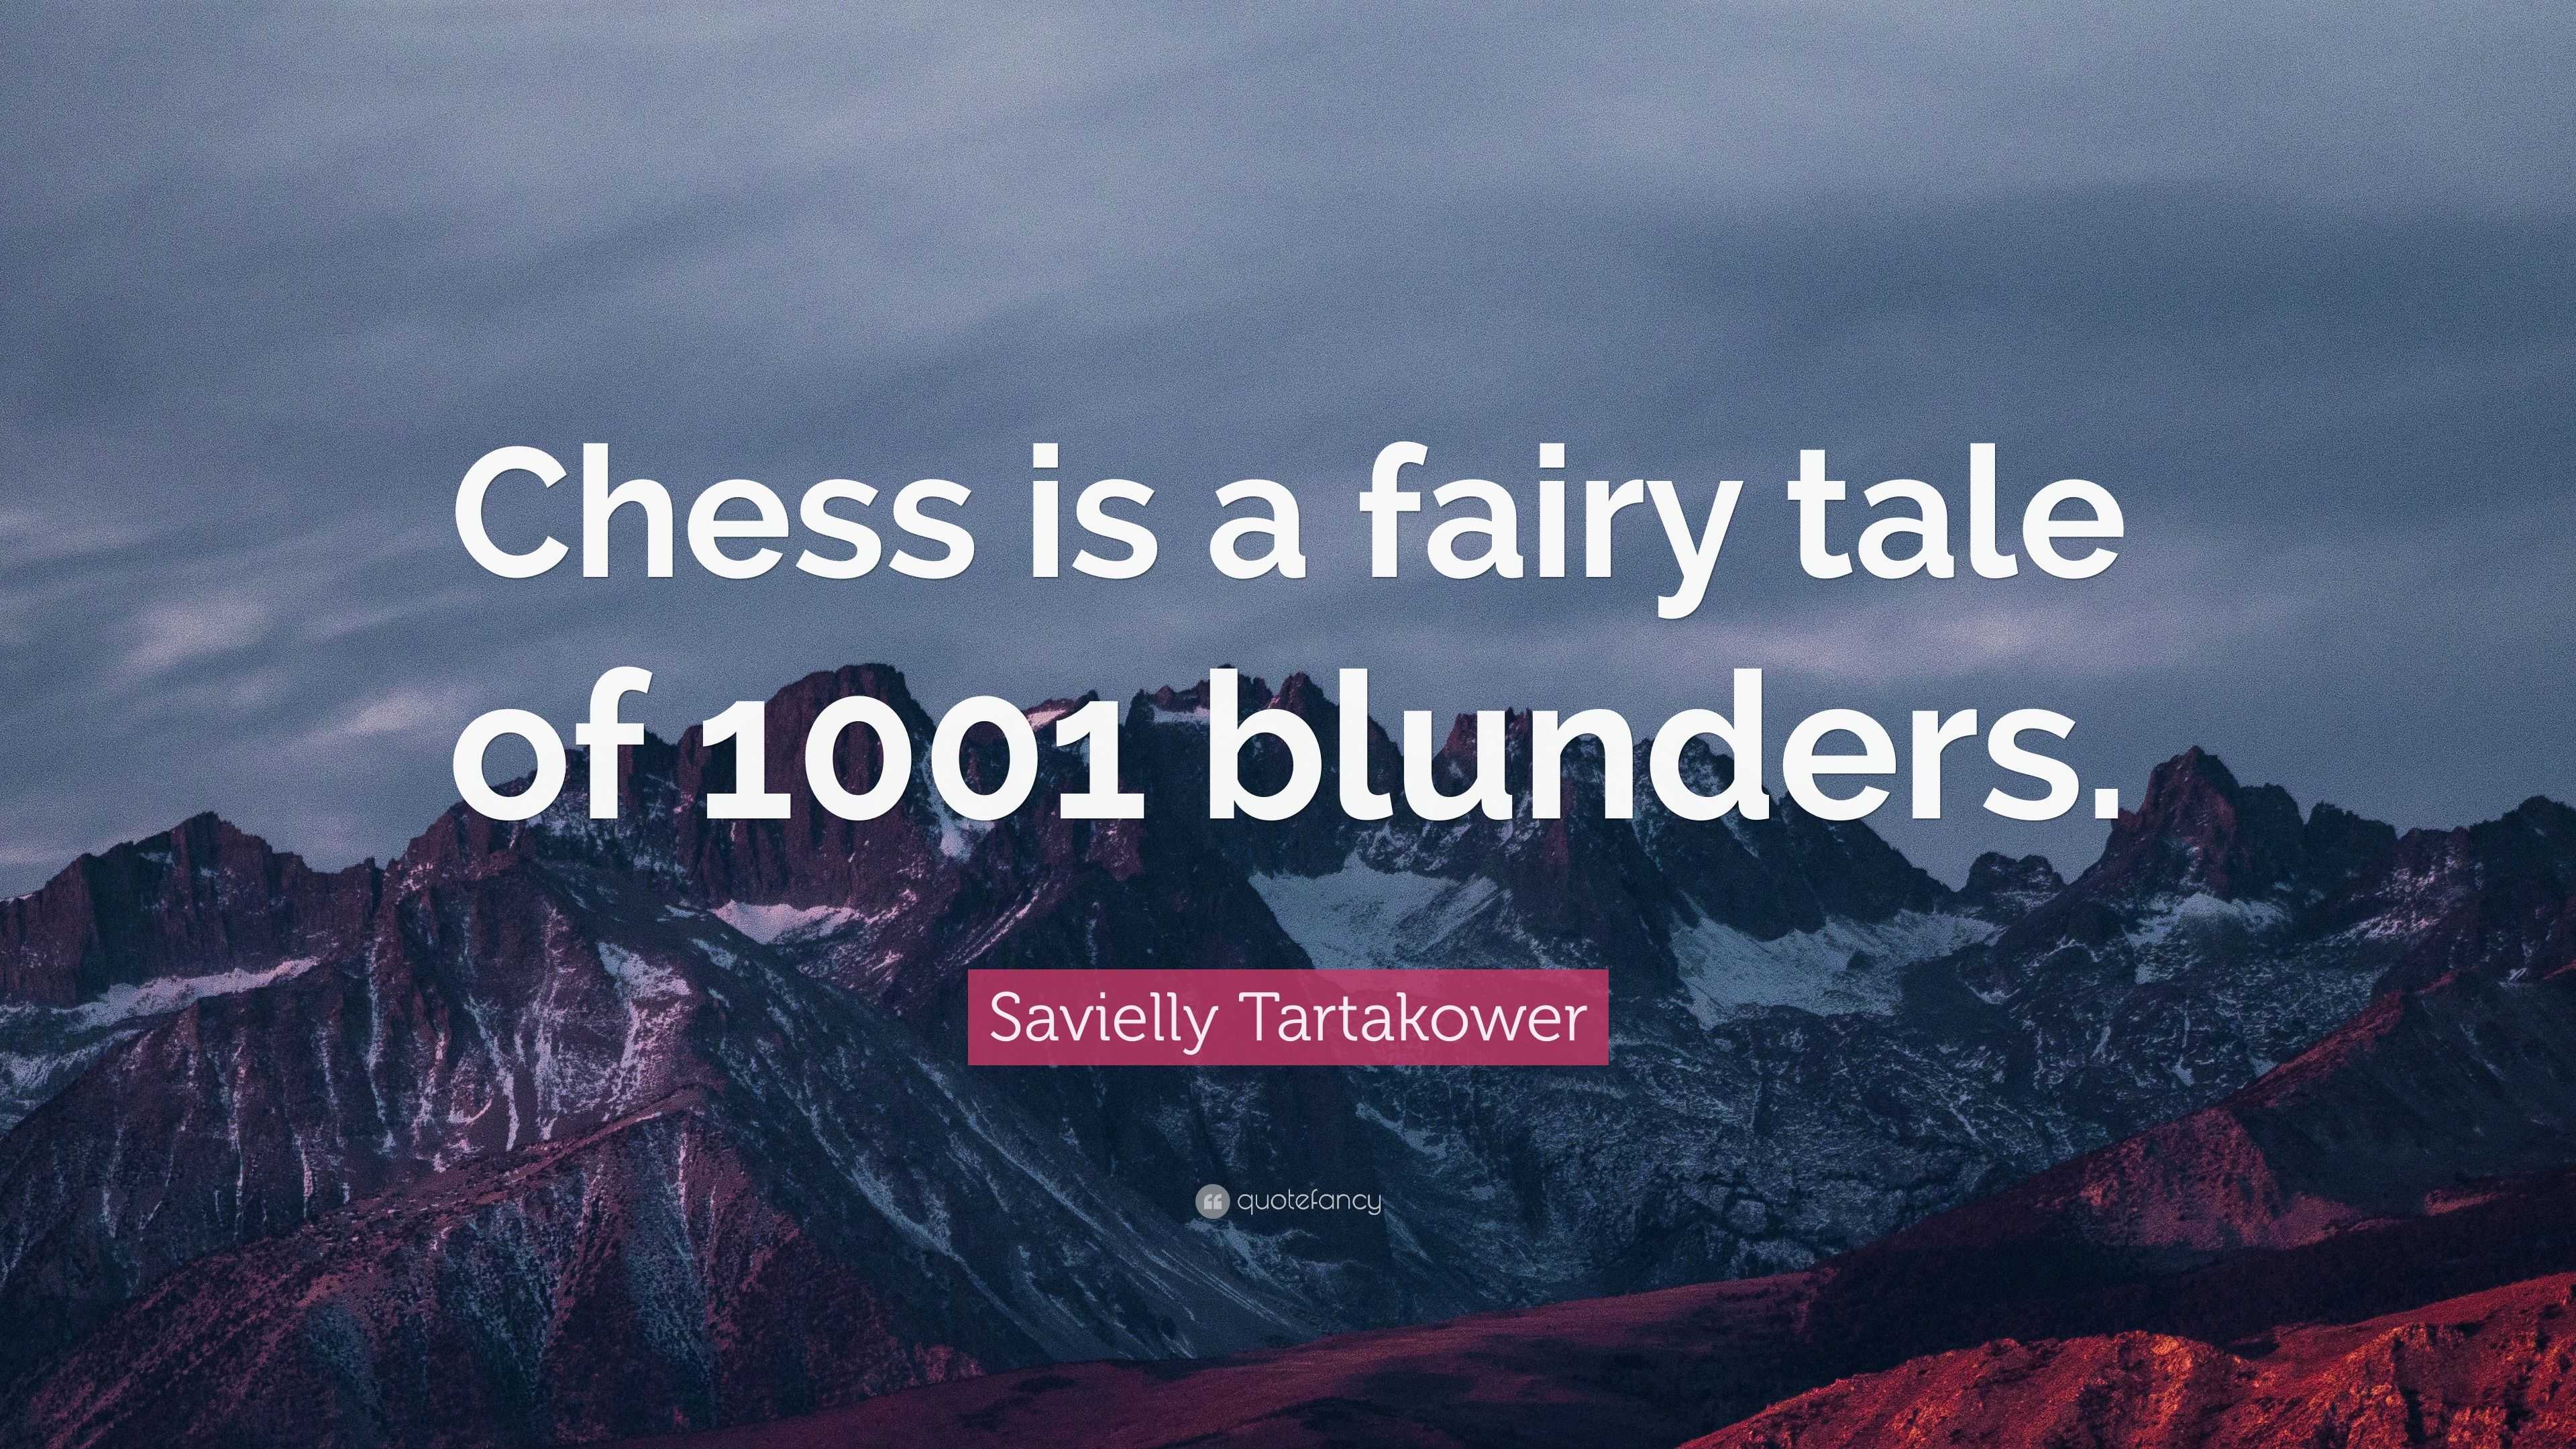 Savielly Tartakower Quote: “Chess is a fairy tale of 1001 blunders.”